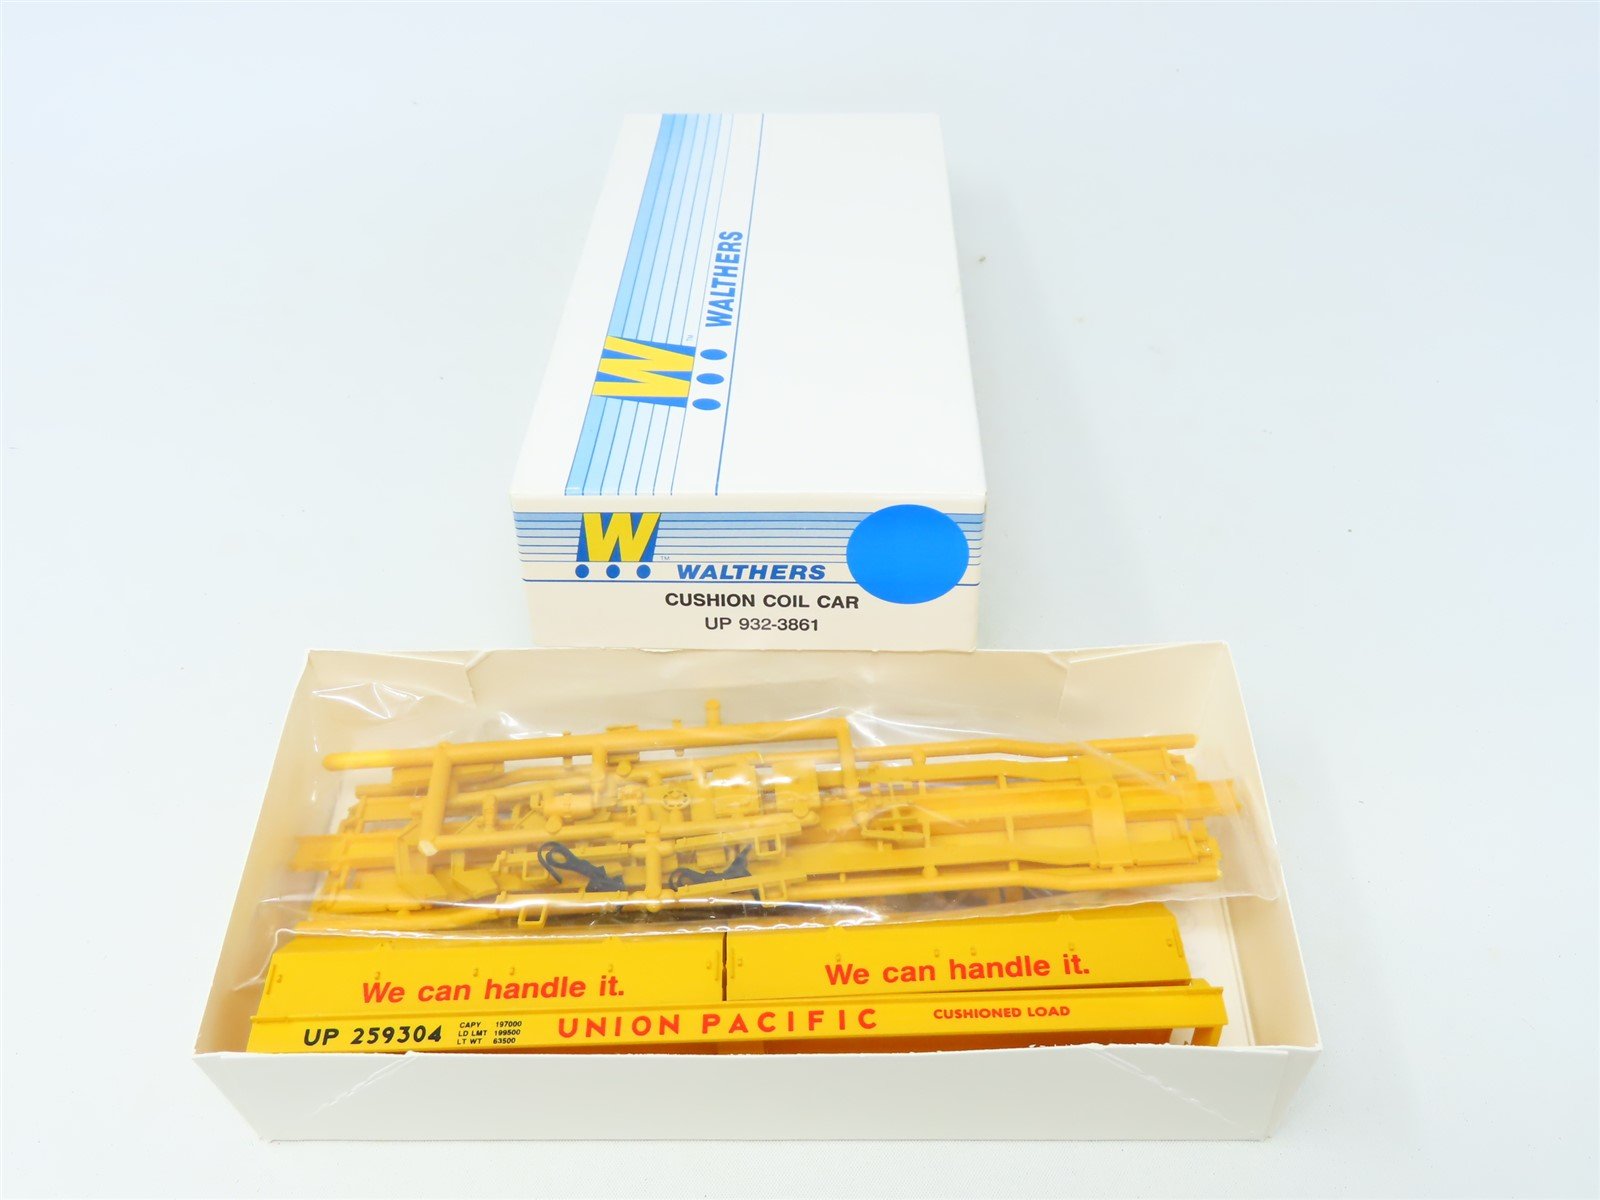 HO Walthers Kit 932-3861 UP Union Pacific "We Can Handle It" Coil Car #259304